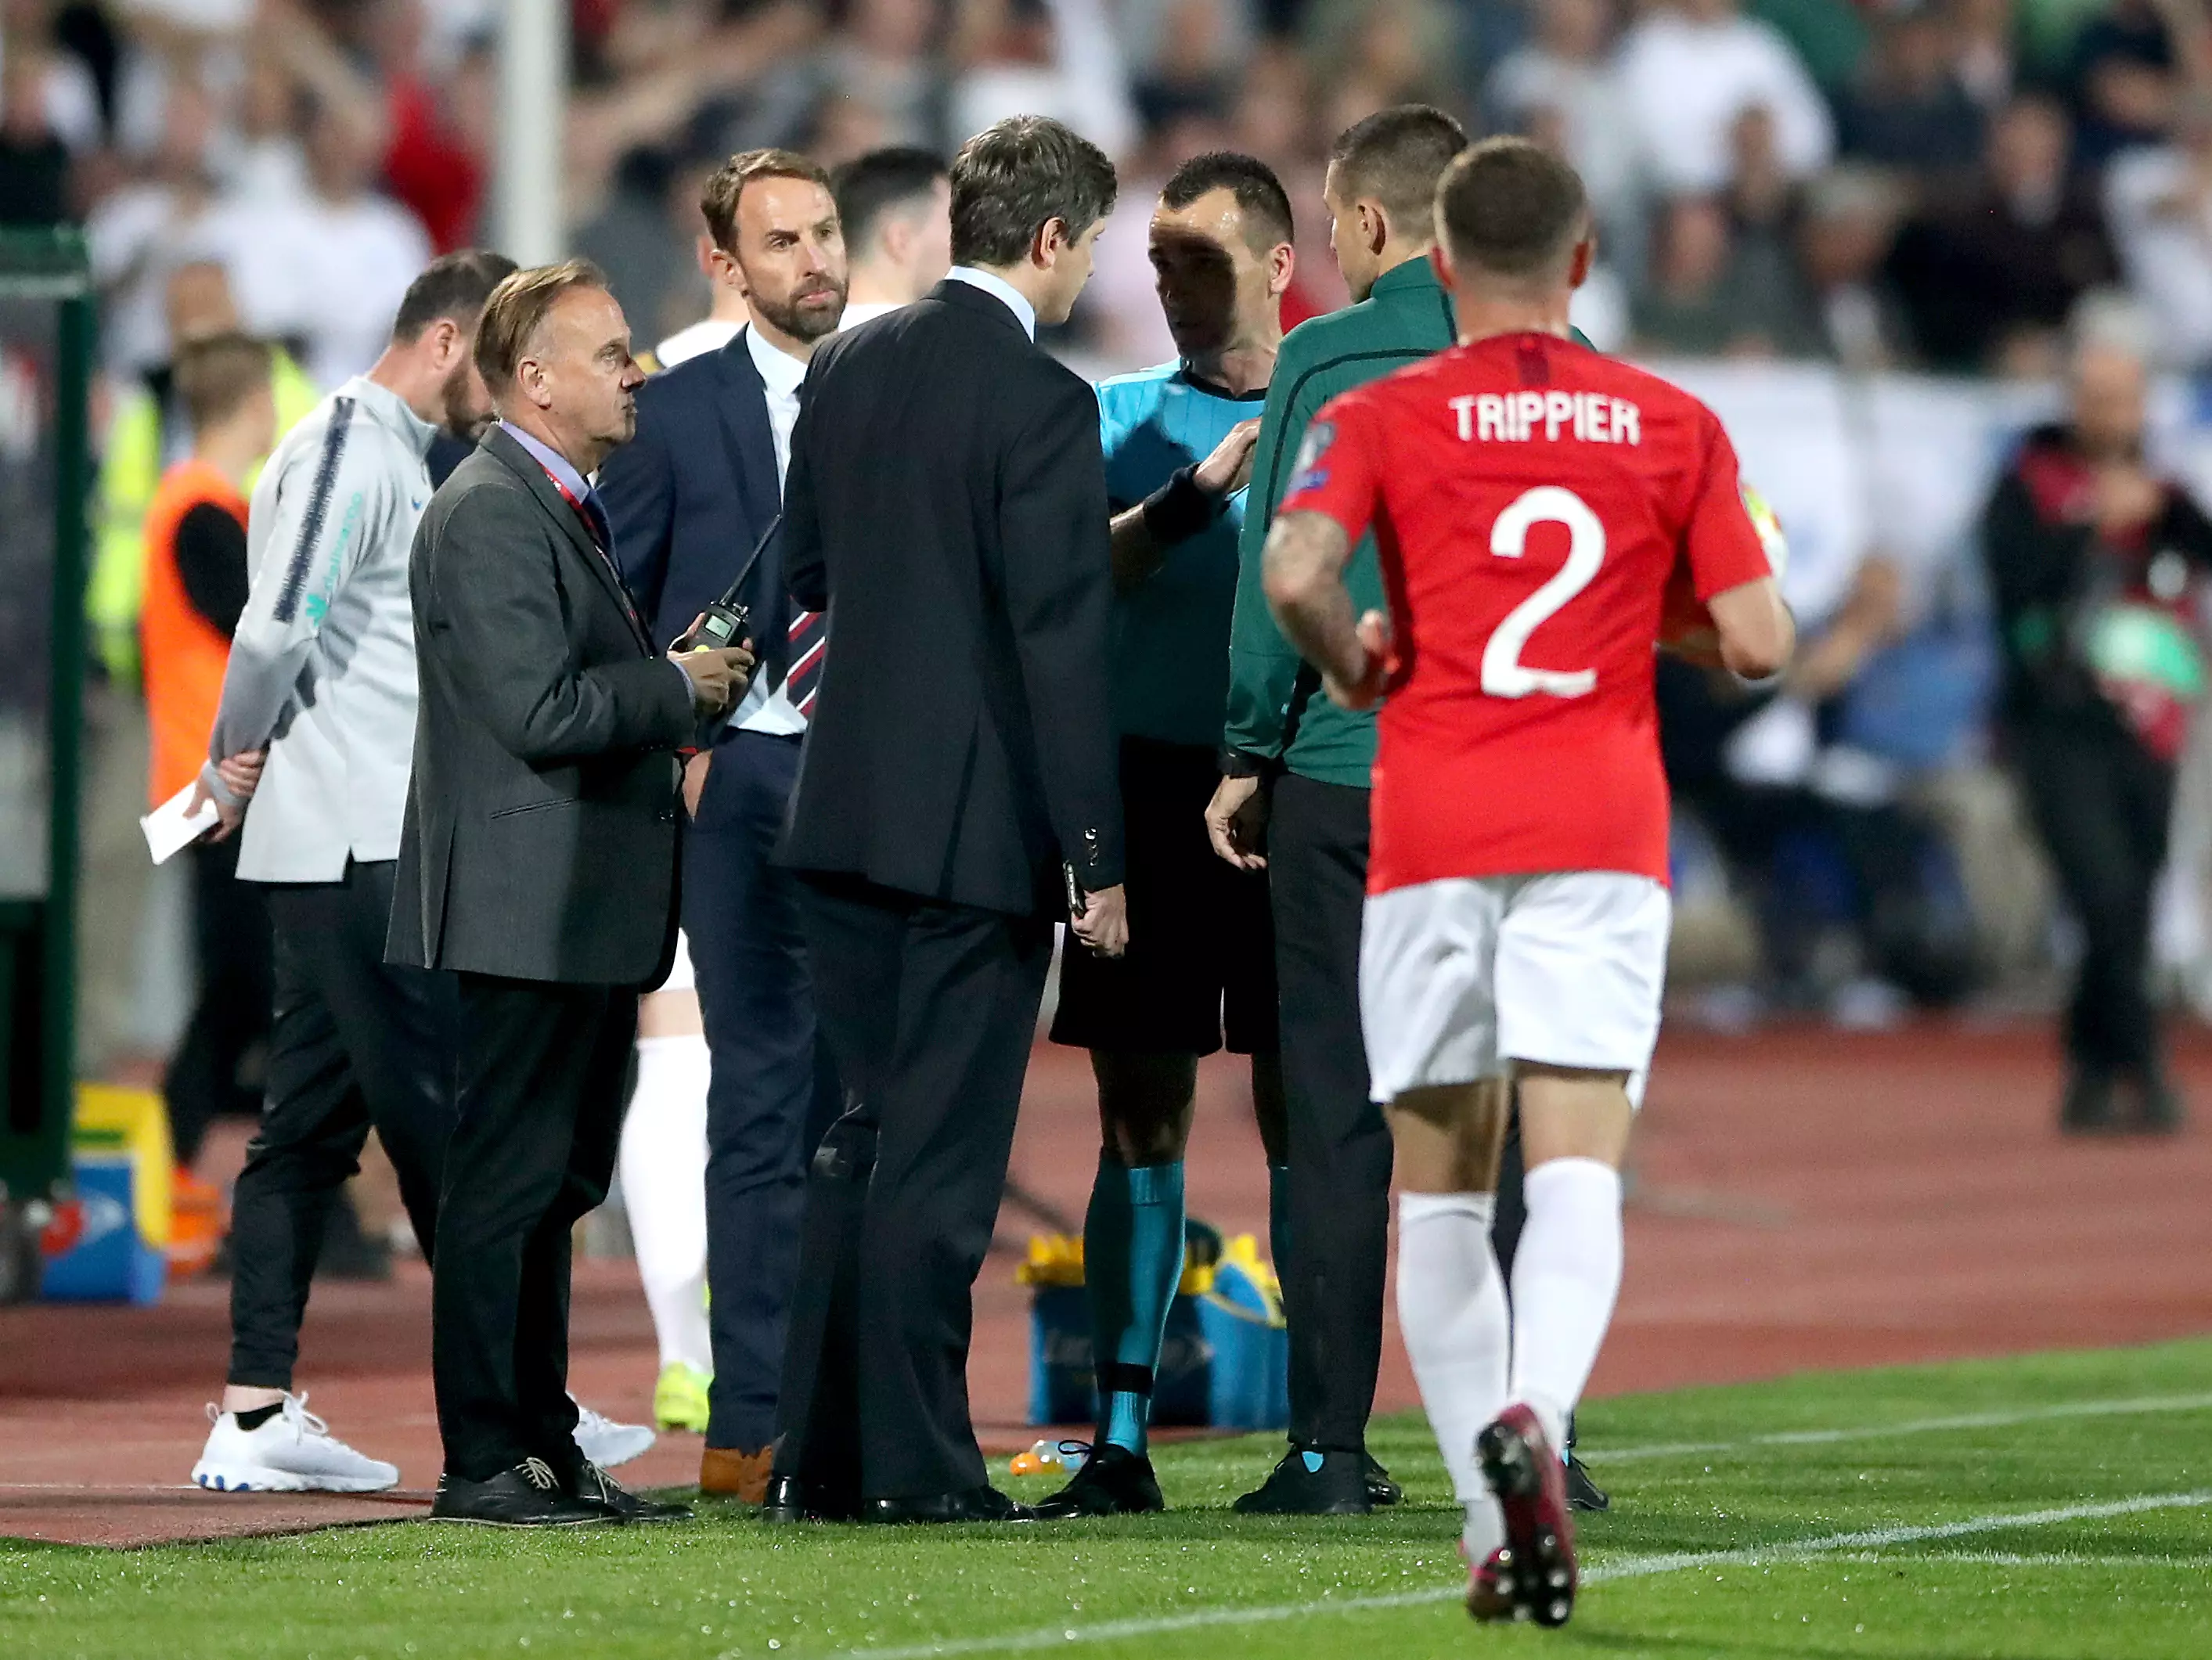 Gareth Southgate in conversation with the referee after the game was stopped. Image: PA Images